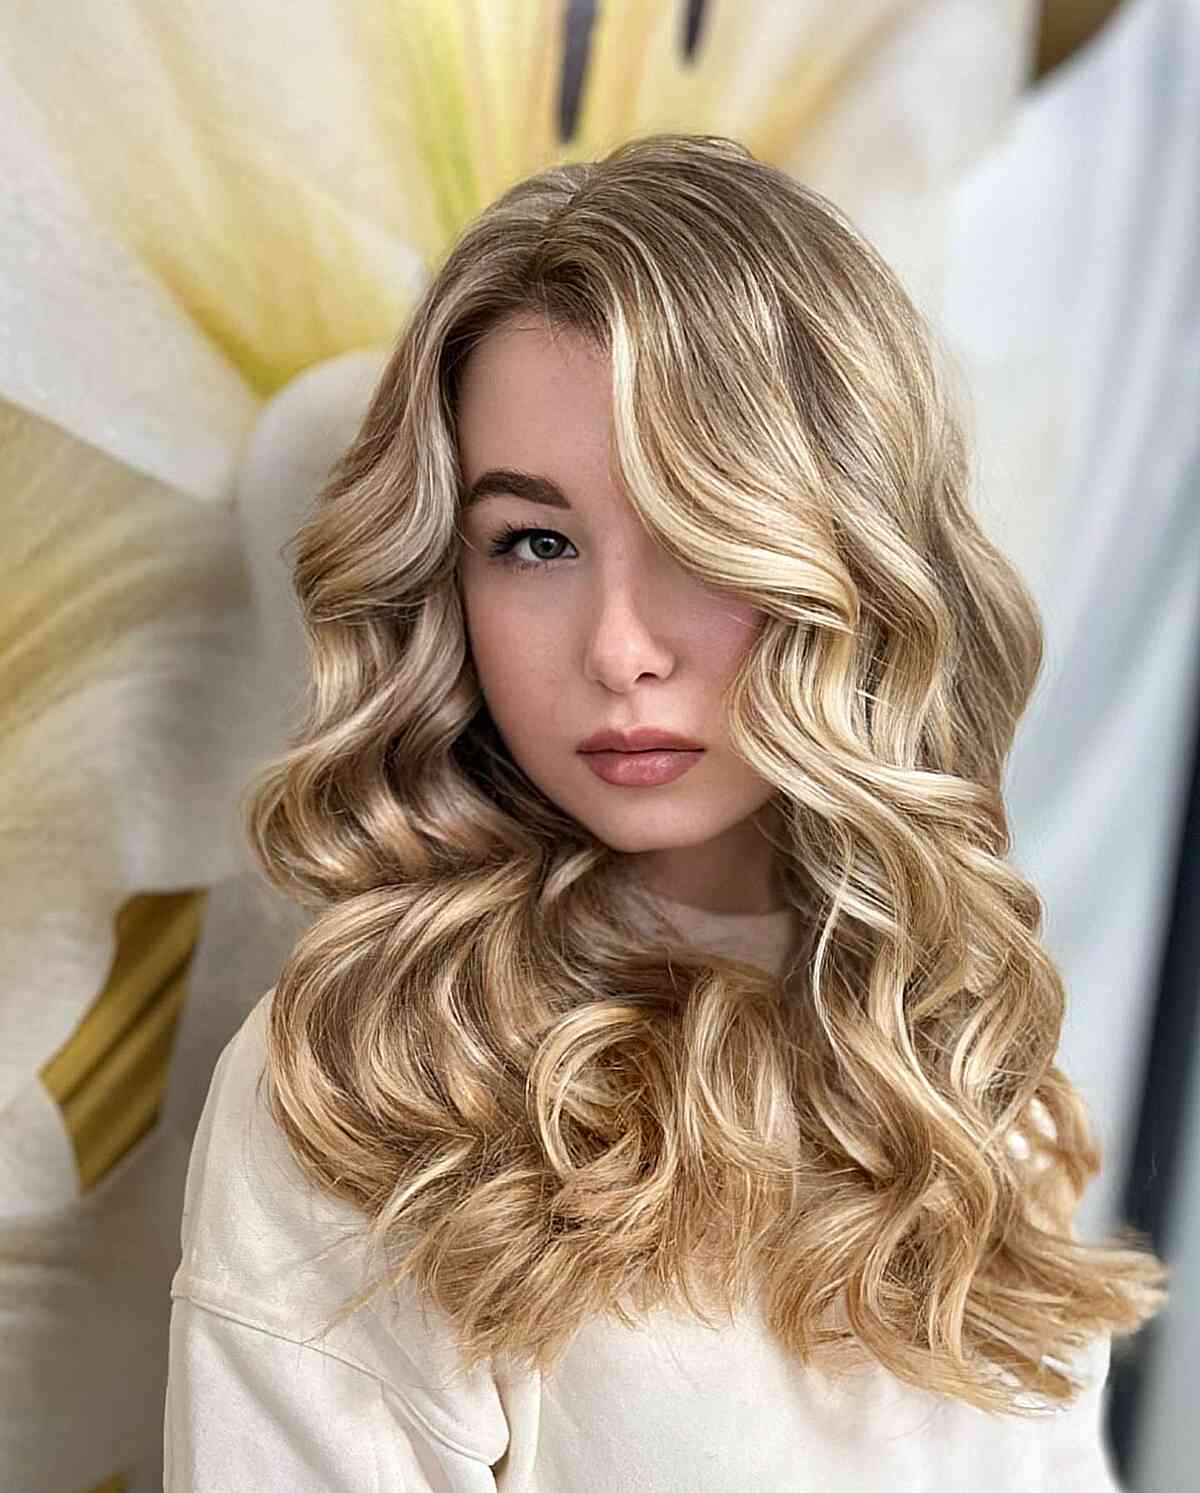 Dark Rooted Blonde Balayage Curled Hairstyle with a side part